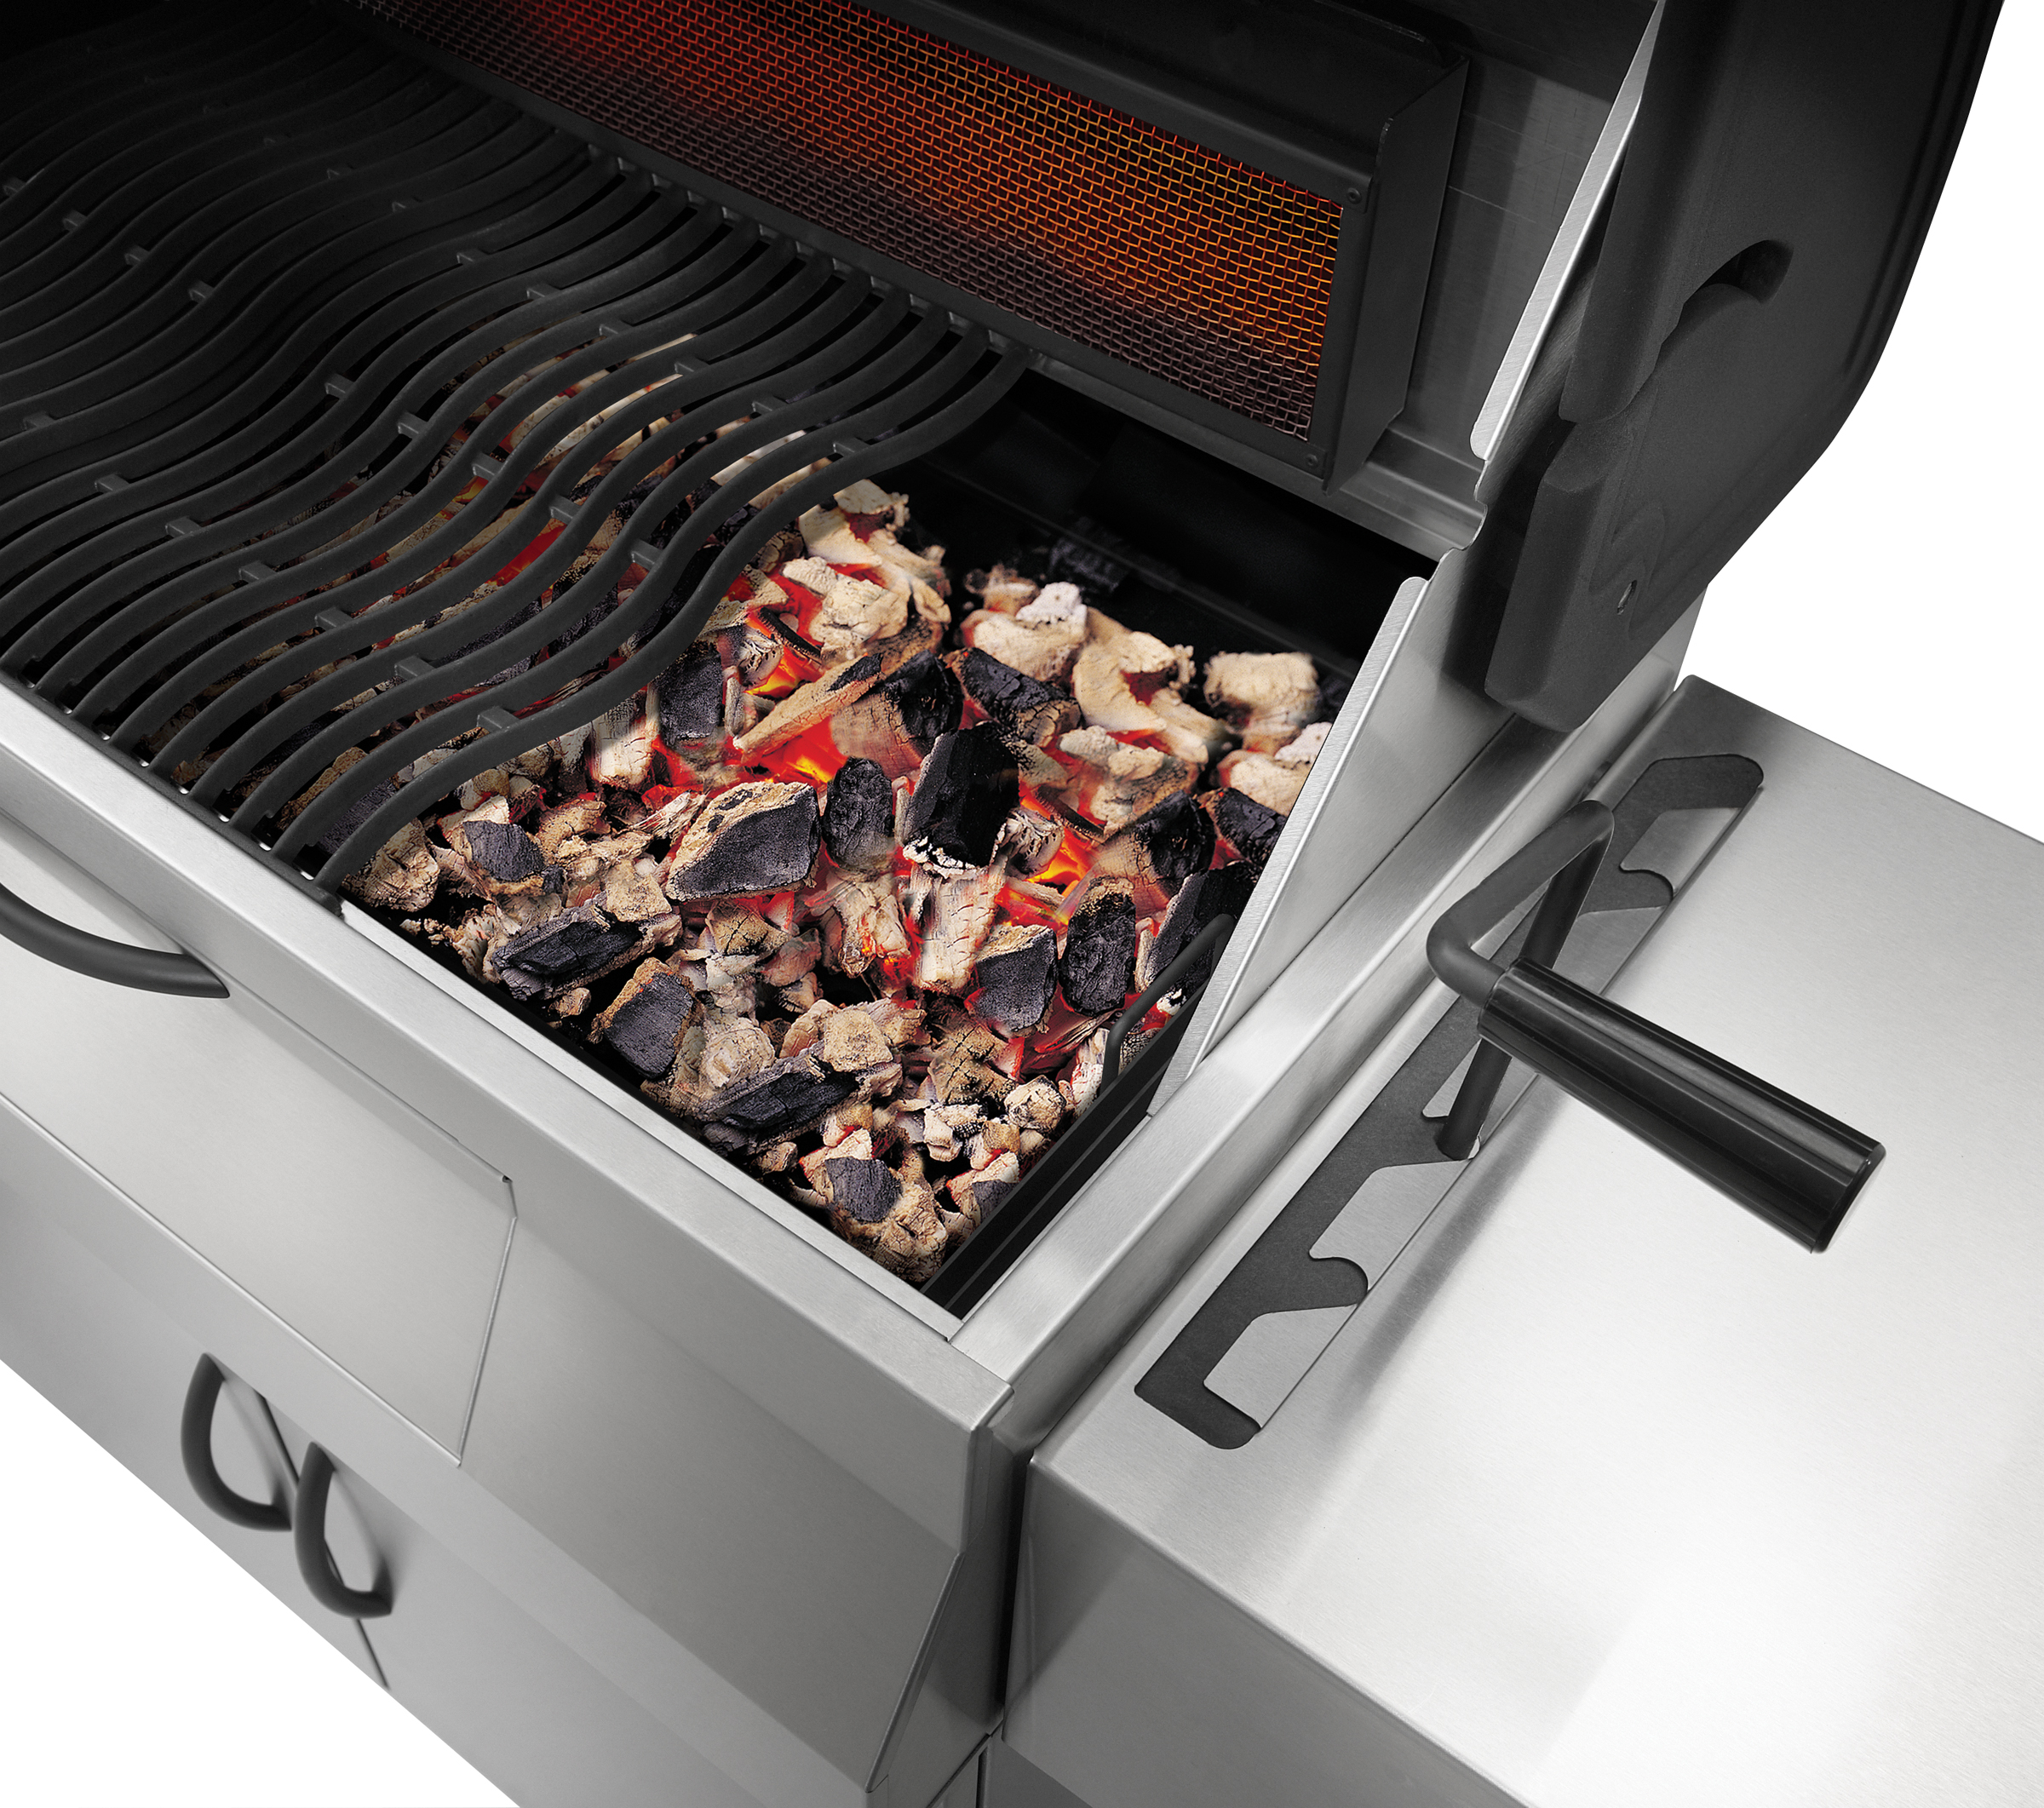 Charcoal Professional Grill, Stainless Steel - PRO605CSS - image 4 of 7